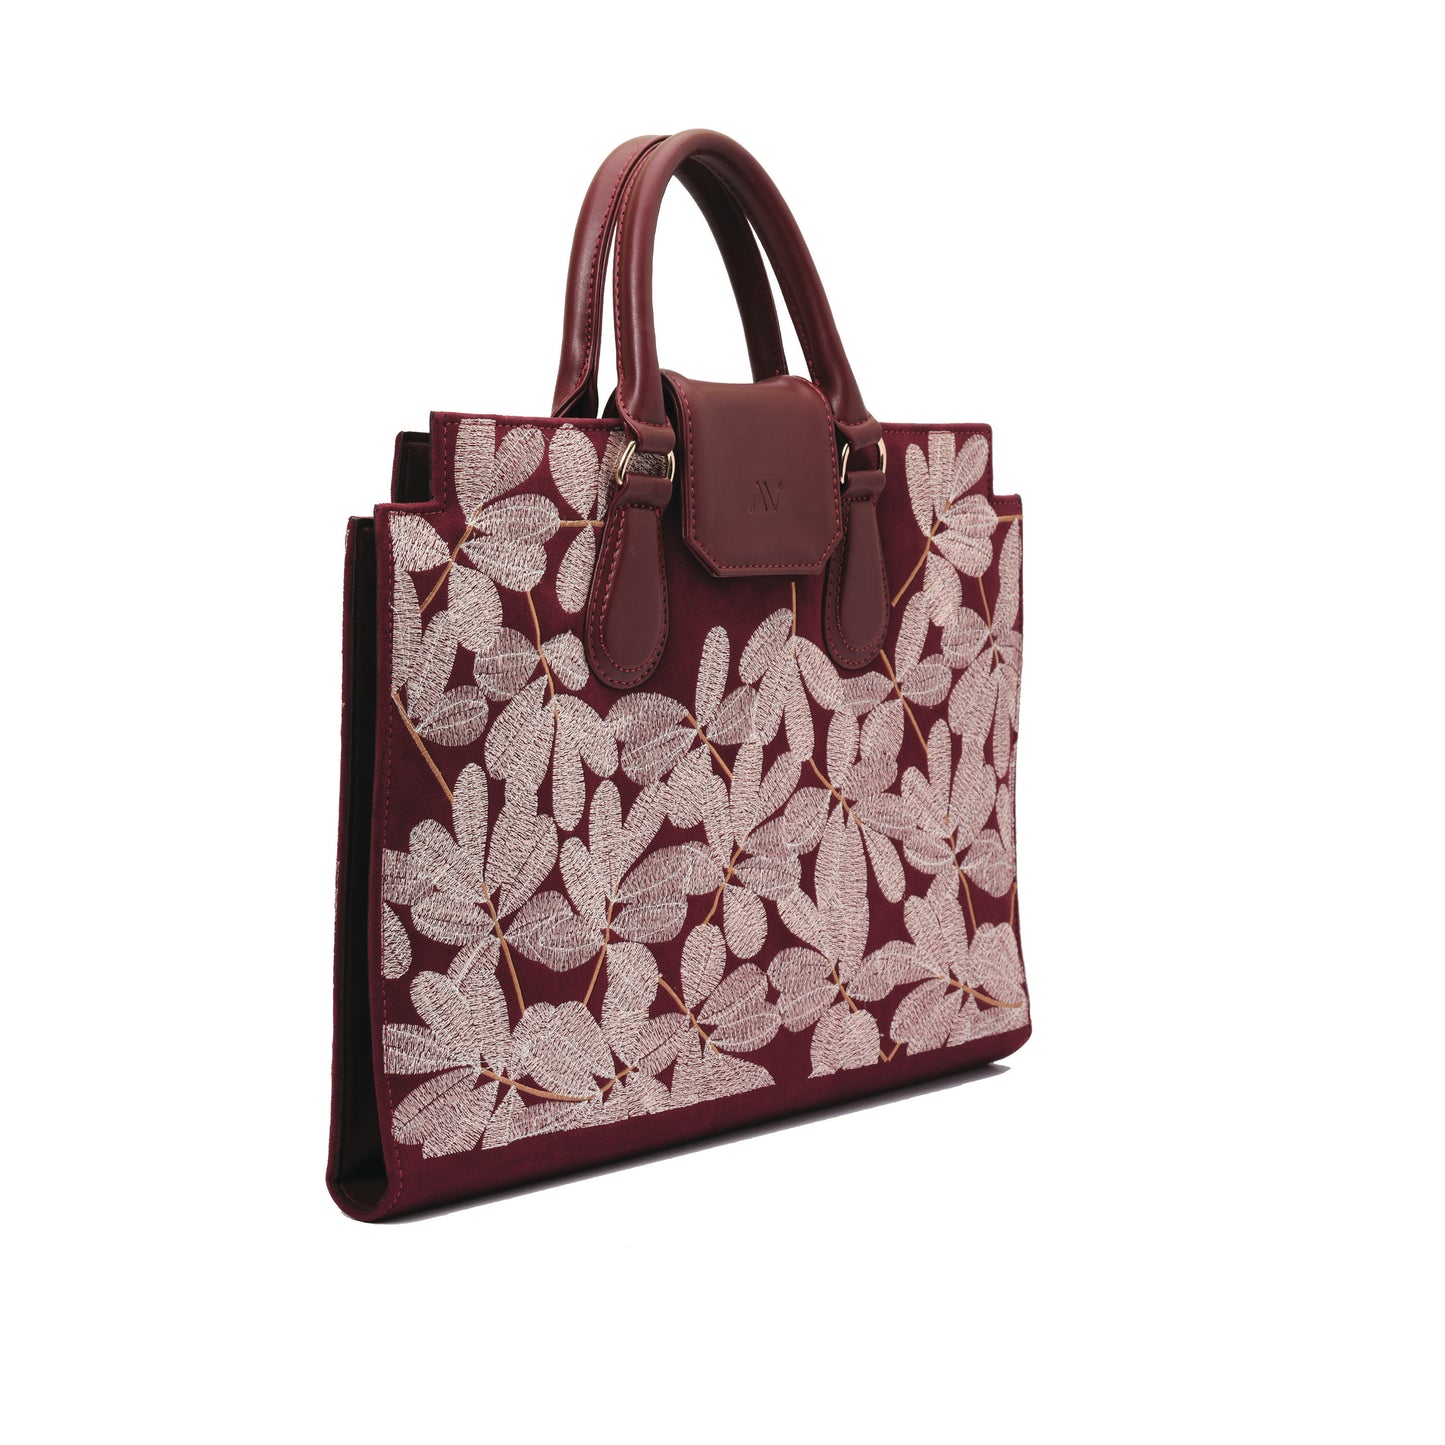 Burgundy Laptop File Bag with embroideries flowers - Code 2201